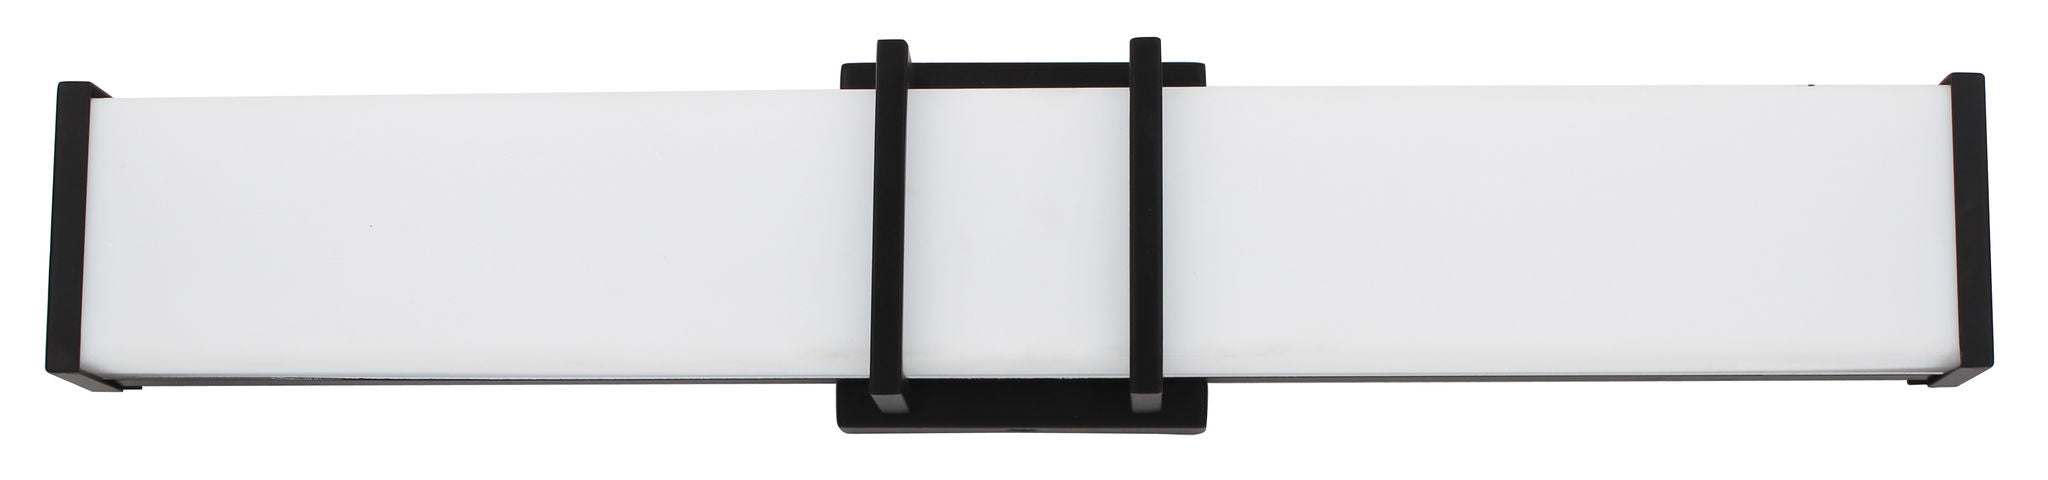 Tomero Sconce Black INTEGRATED LED - 204124A | EGLO